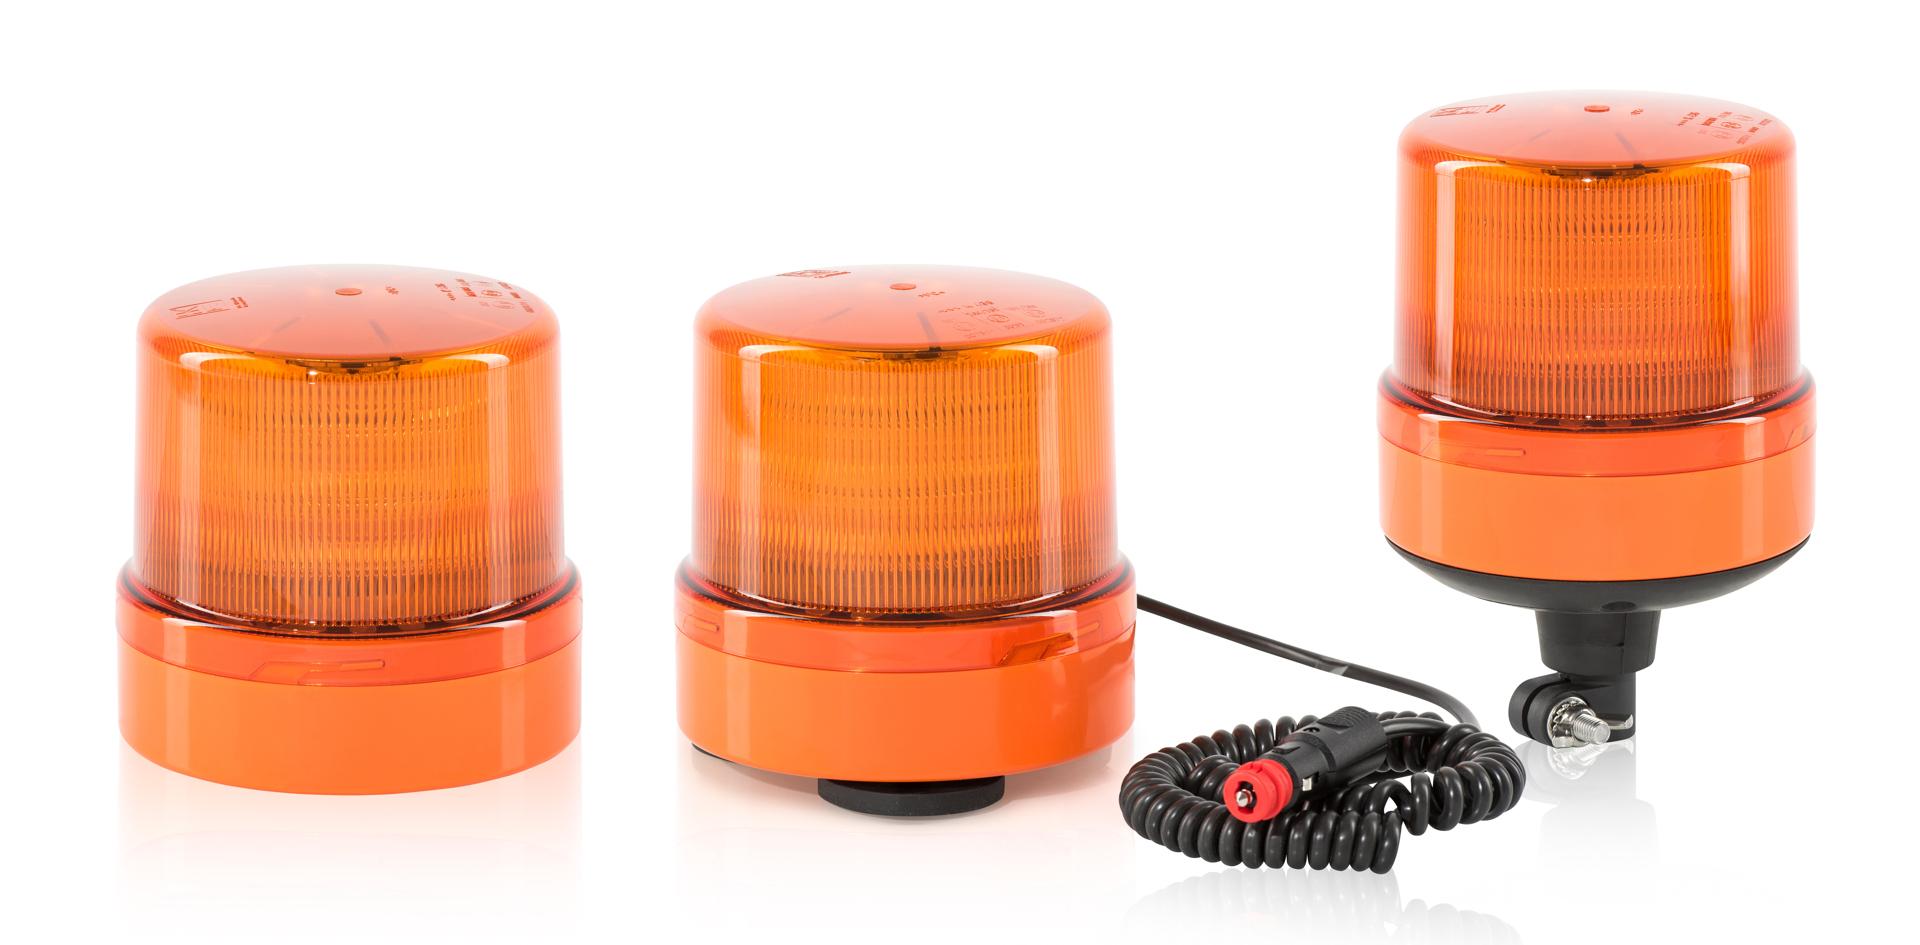 Hänsch GmbH - COMET - LED beacons - Area of application: “Amber” - Products